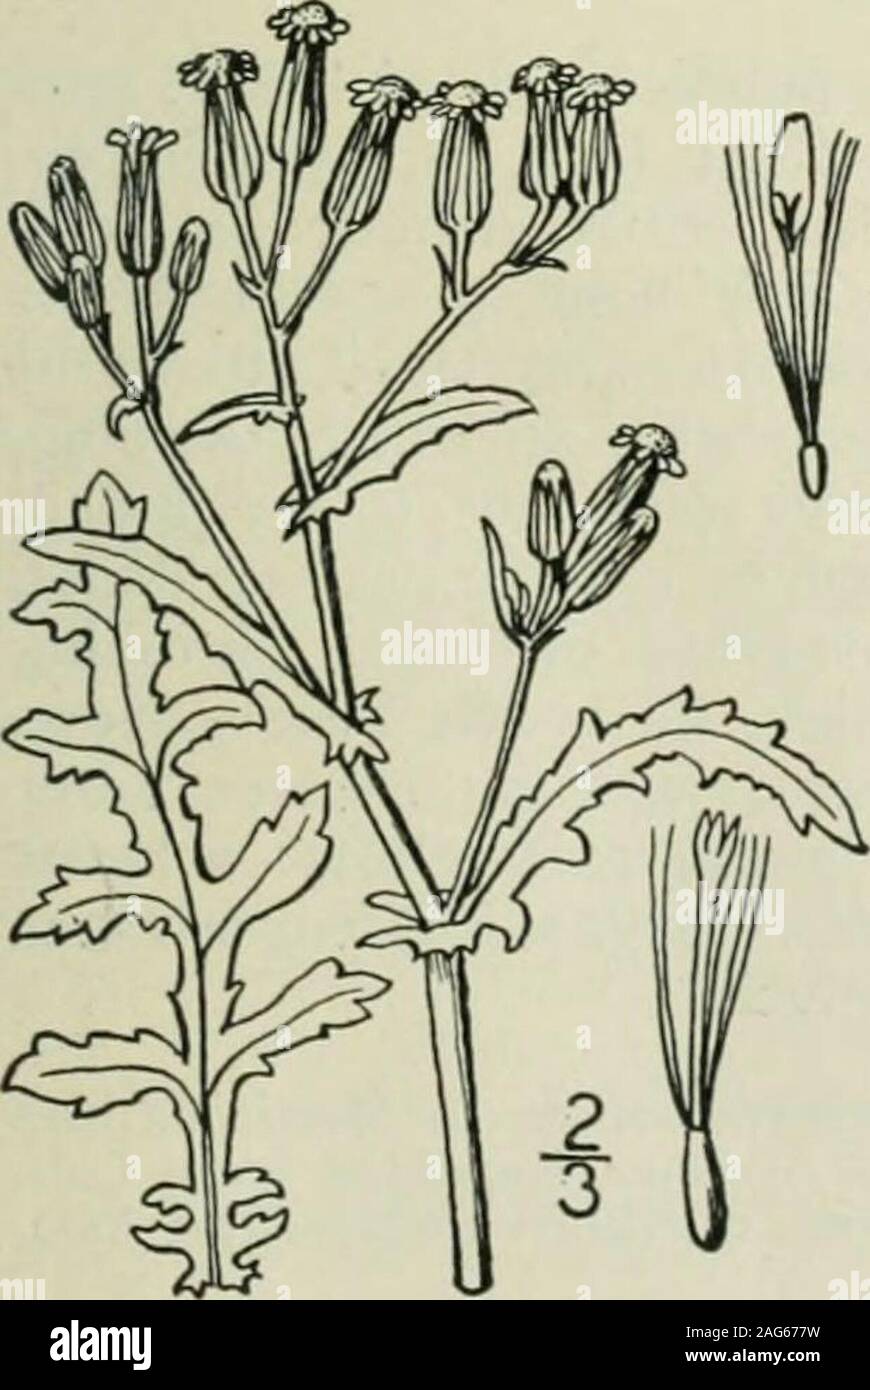 . An illustrated flora of the northern United States, Canada and the British possessions : from Newfoundland to the parallel of the southern boundary of Virginia and from the Atlantic Ocean westward to the 102nd meridian. 2. Senecio sylvaticus L. ood Groundsel.Fig. 4611. Senecio sylvaticus L. Sp. PI. 868. 1753. Annual, glabrous or puberulent; stem usually much branch-ed. i°-2i° high, leafy. Leaves pinnatifid, oblong or lanceo-late in outline, the segments oblong or spatulate, obtuse,dentate, lobed or entire, or the uppermost leaves linear andmerely dentate; heads several or numerous in the c Stock Photo